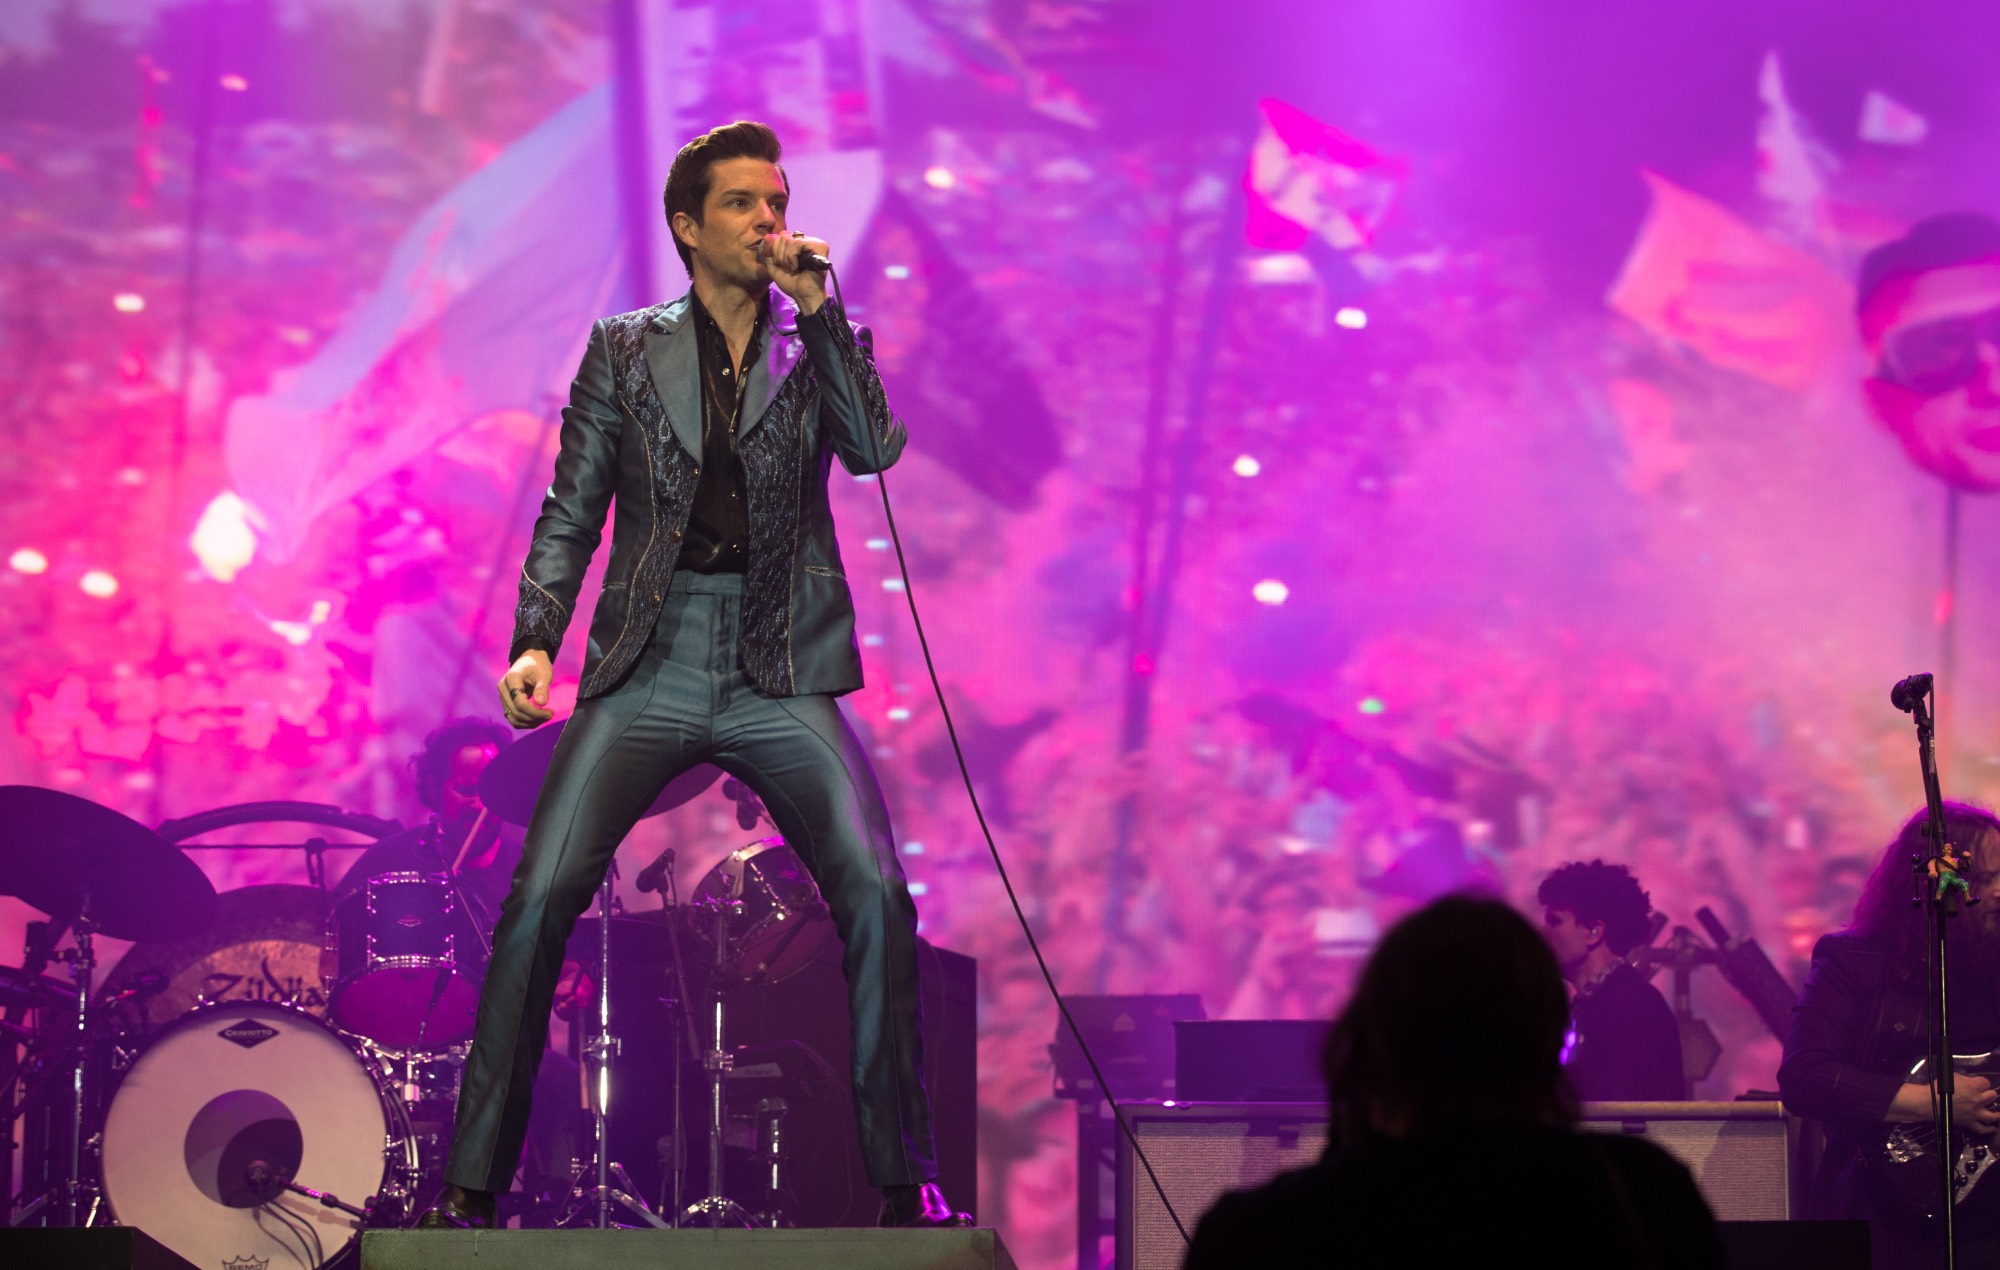 The Killers say they scrapped new album because it didn’t feel “authentic”